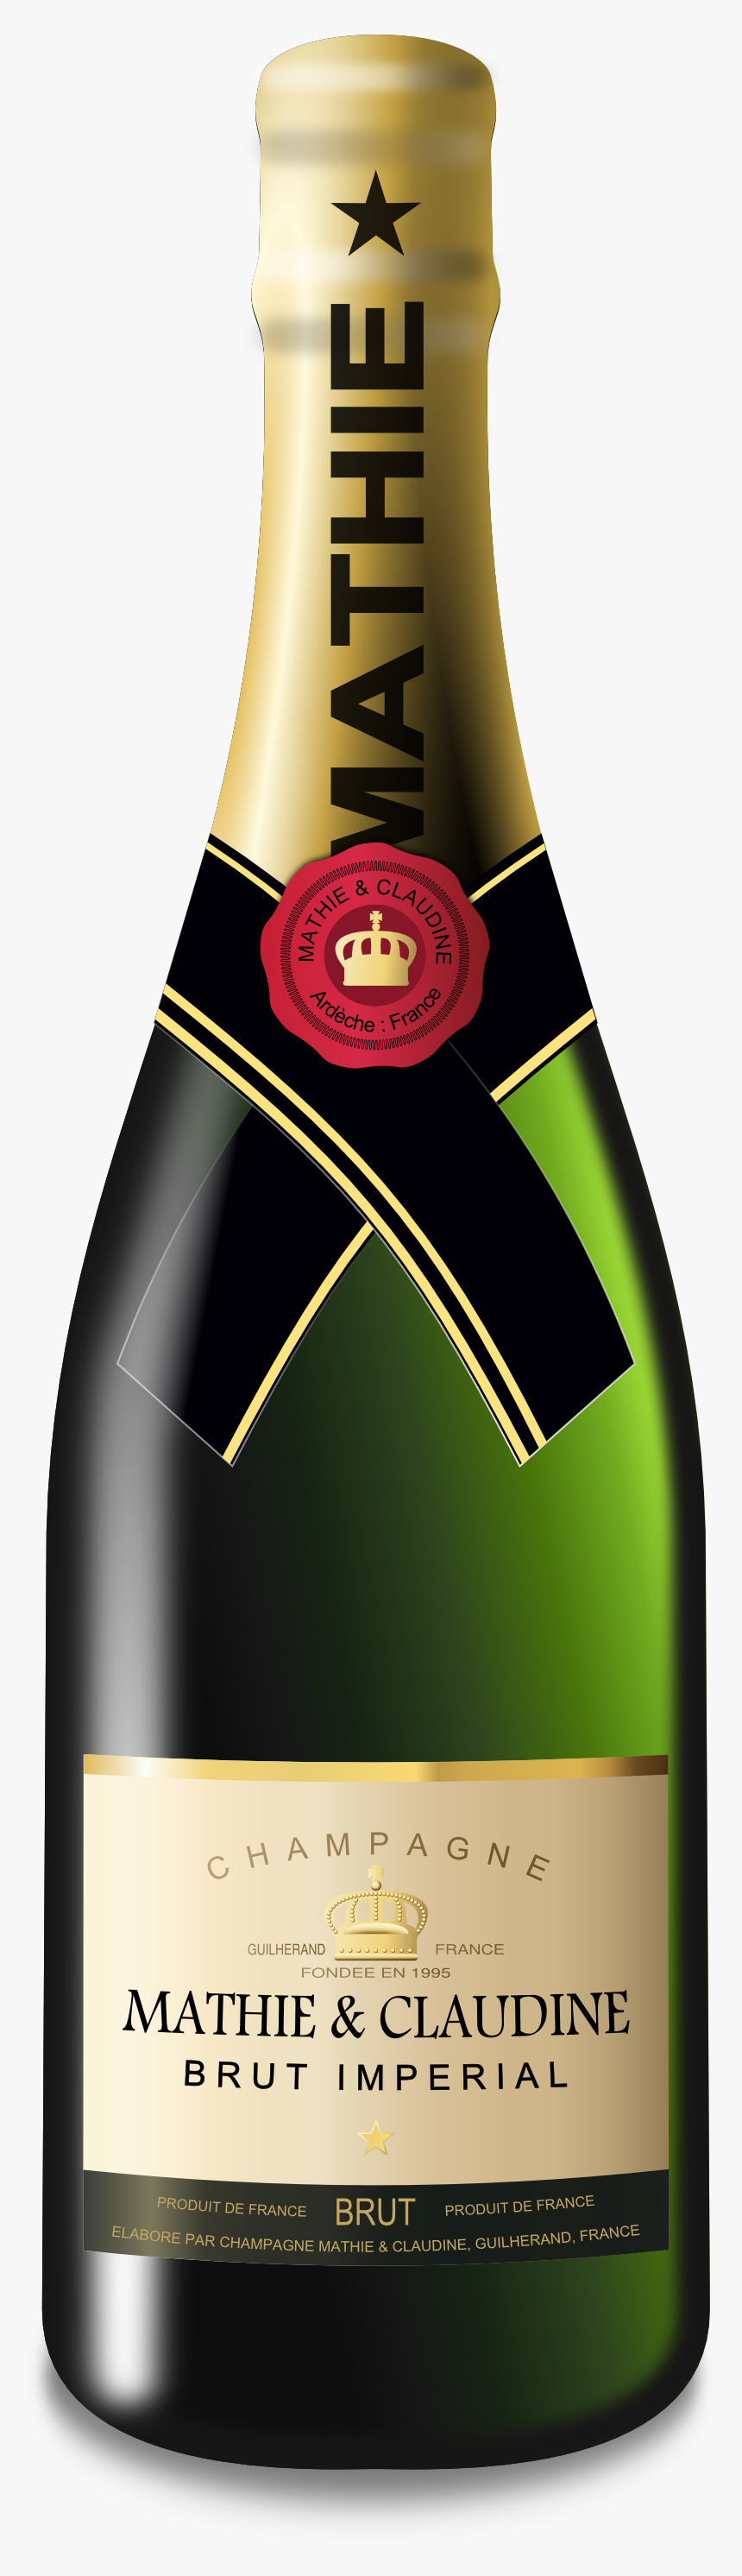 Champaign Bottle Png Image - Bottle Of Champagne Png, Transparent Png, Free Download